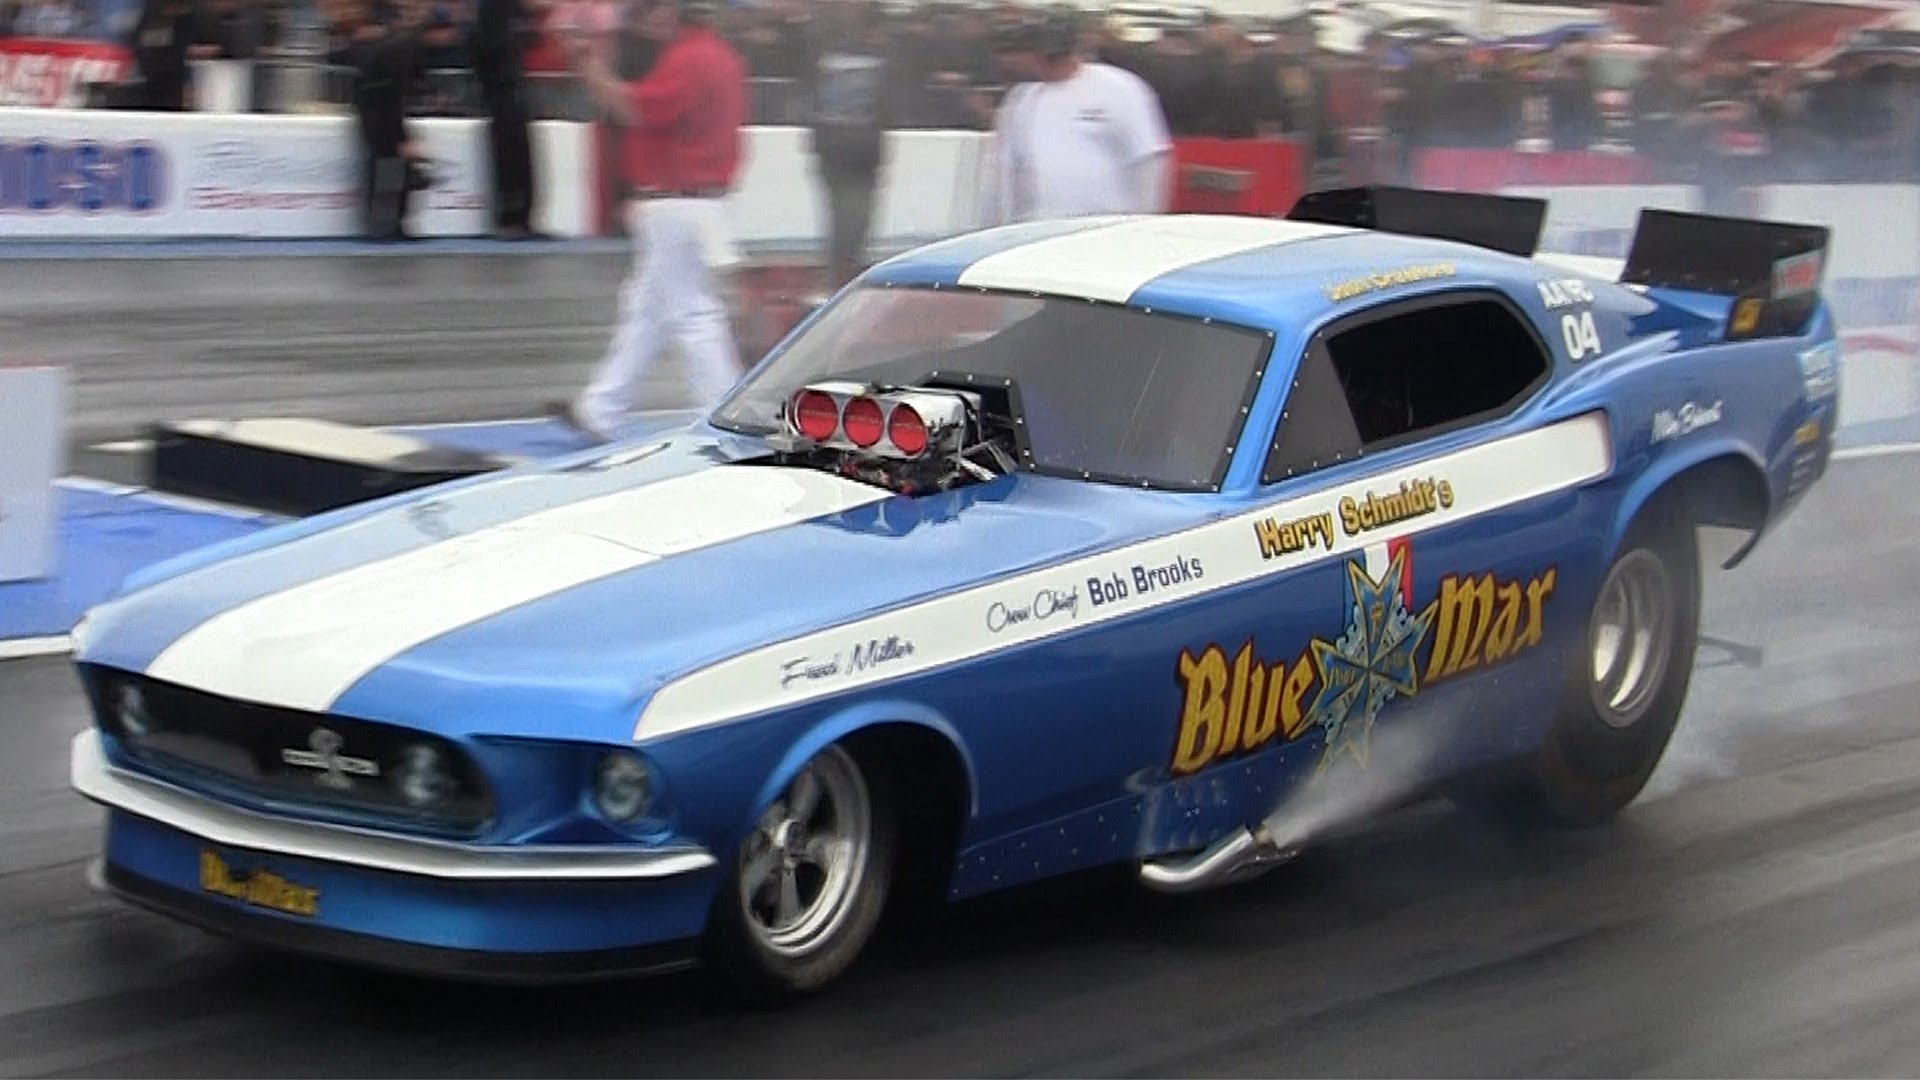 funnycar, Funny, Nhra, Drag, Racing, Race, Hot, Rod, Rods, Blue, Max, Ford, Mustang Wallpaper